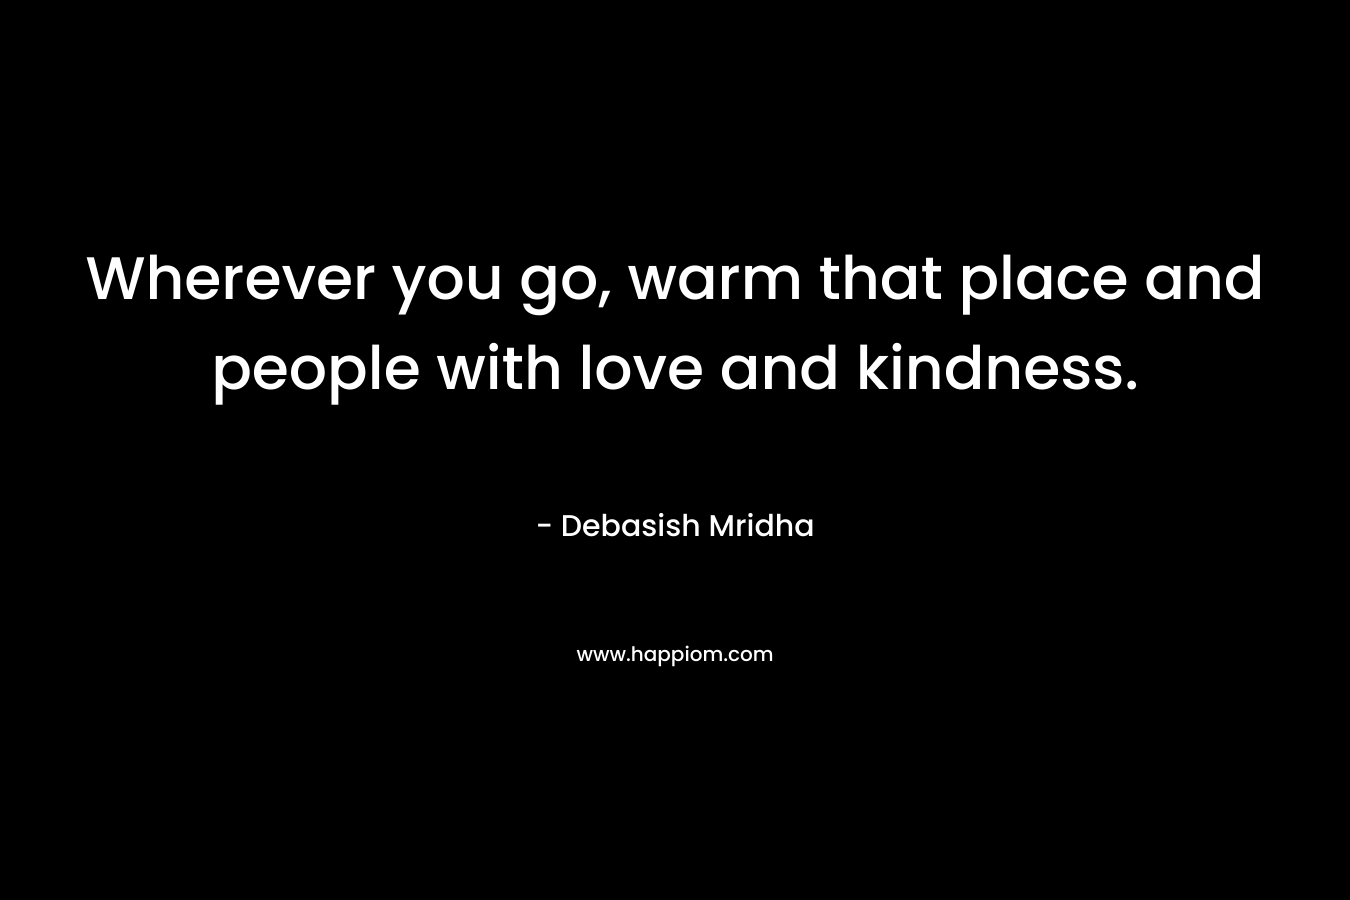 Wherever you go, warm that place and people with love and kindness.